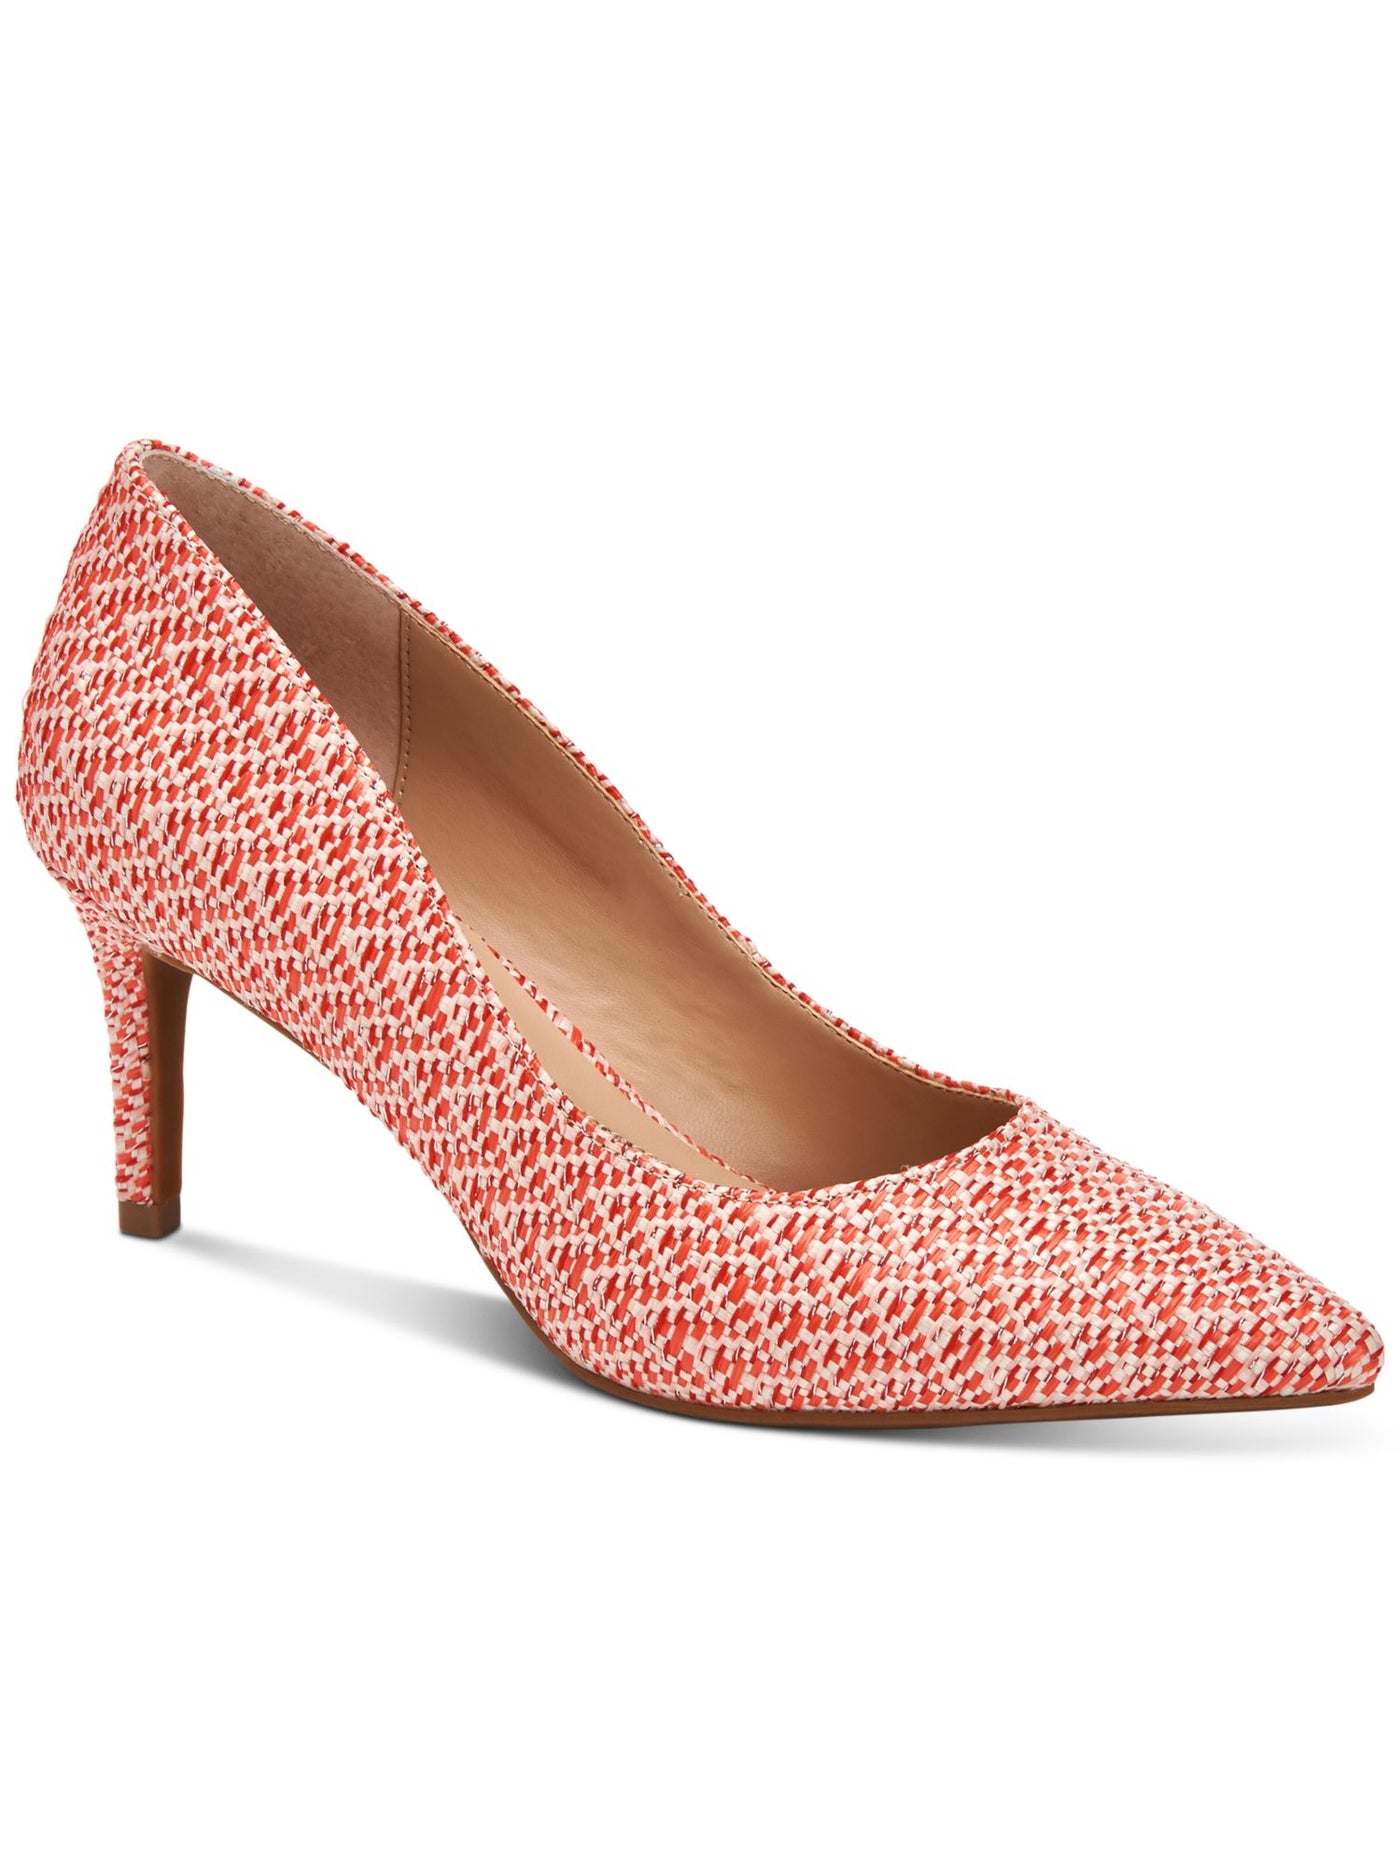 ALFANI Womens Coral Woven Padded Comfort Jeules Pointed Toe Stiletto Slip On Pumps 6.5 M